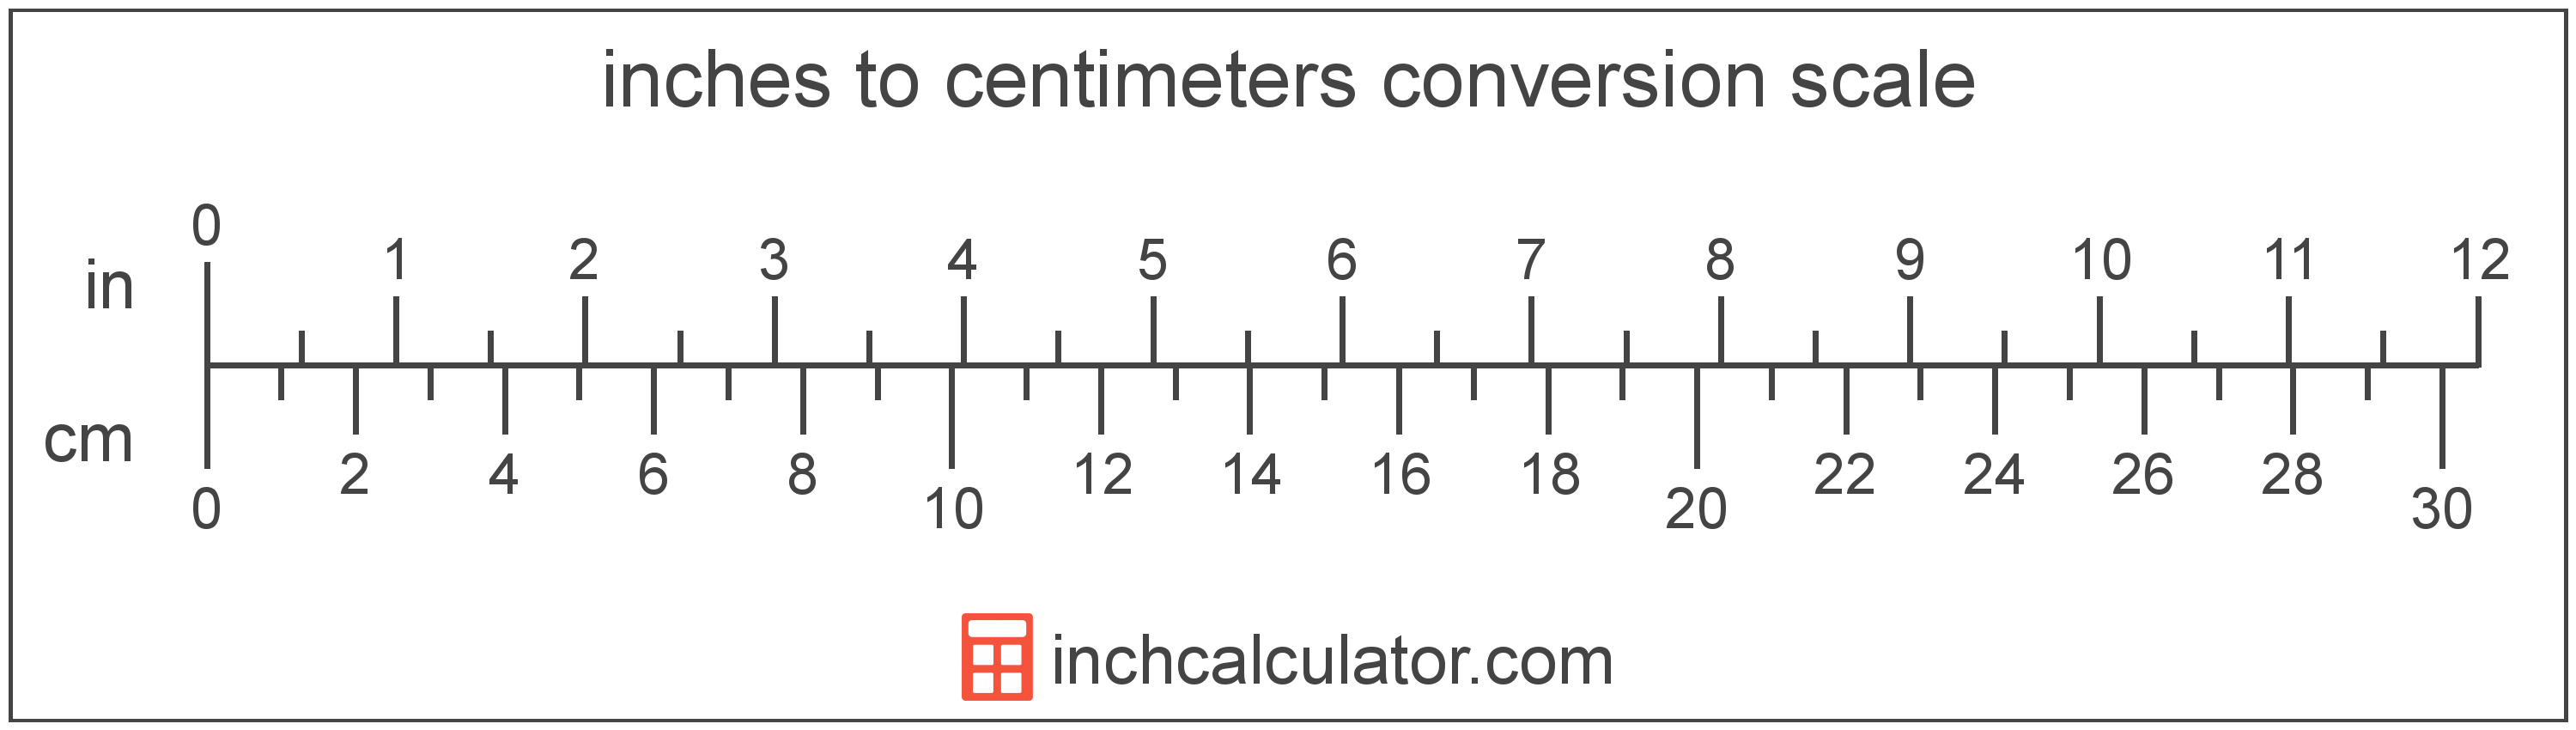 Secretaris dwaas Wees tevreden cm to Inches Conversion (Centimeters To Inches) - Inch Calculator